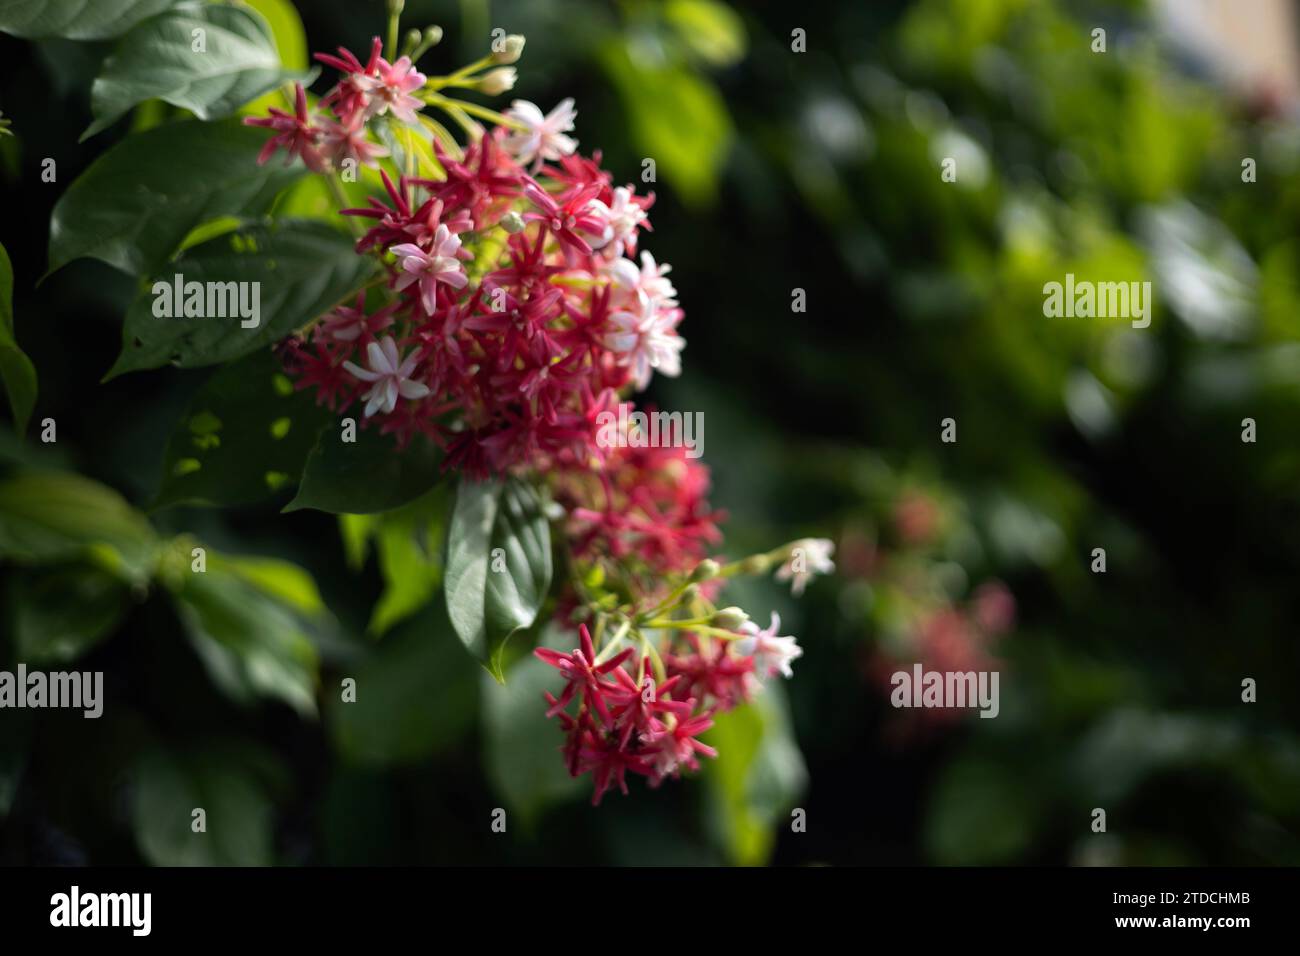 Quisqualis Indica flower plant. Chinese Honey Suckle Flowers.  Pink Flower In The Garden Stock Photo